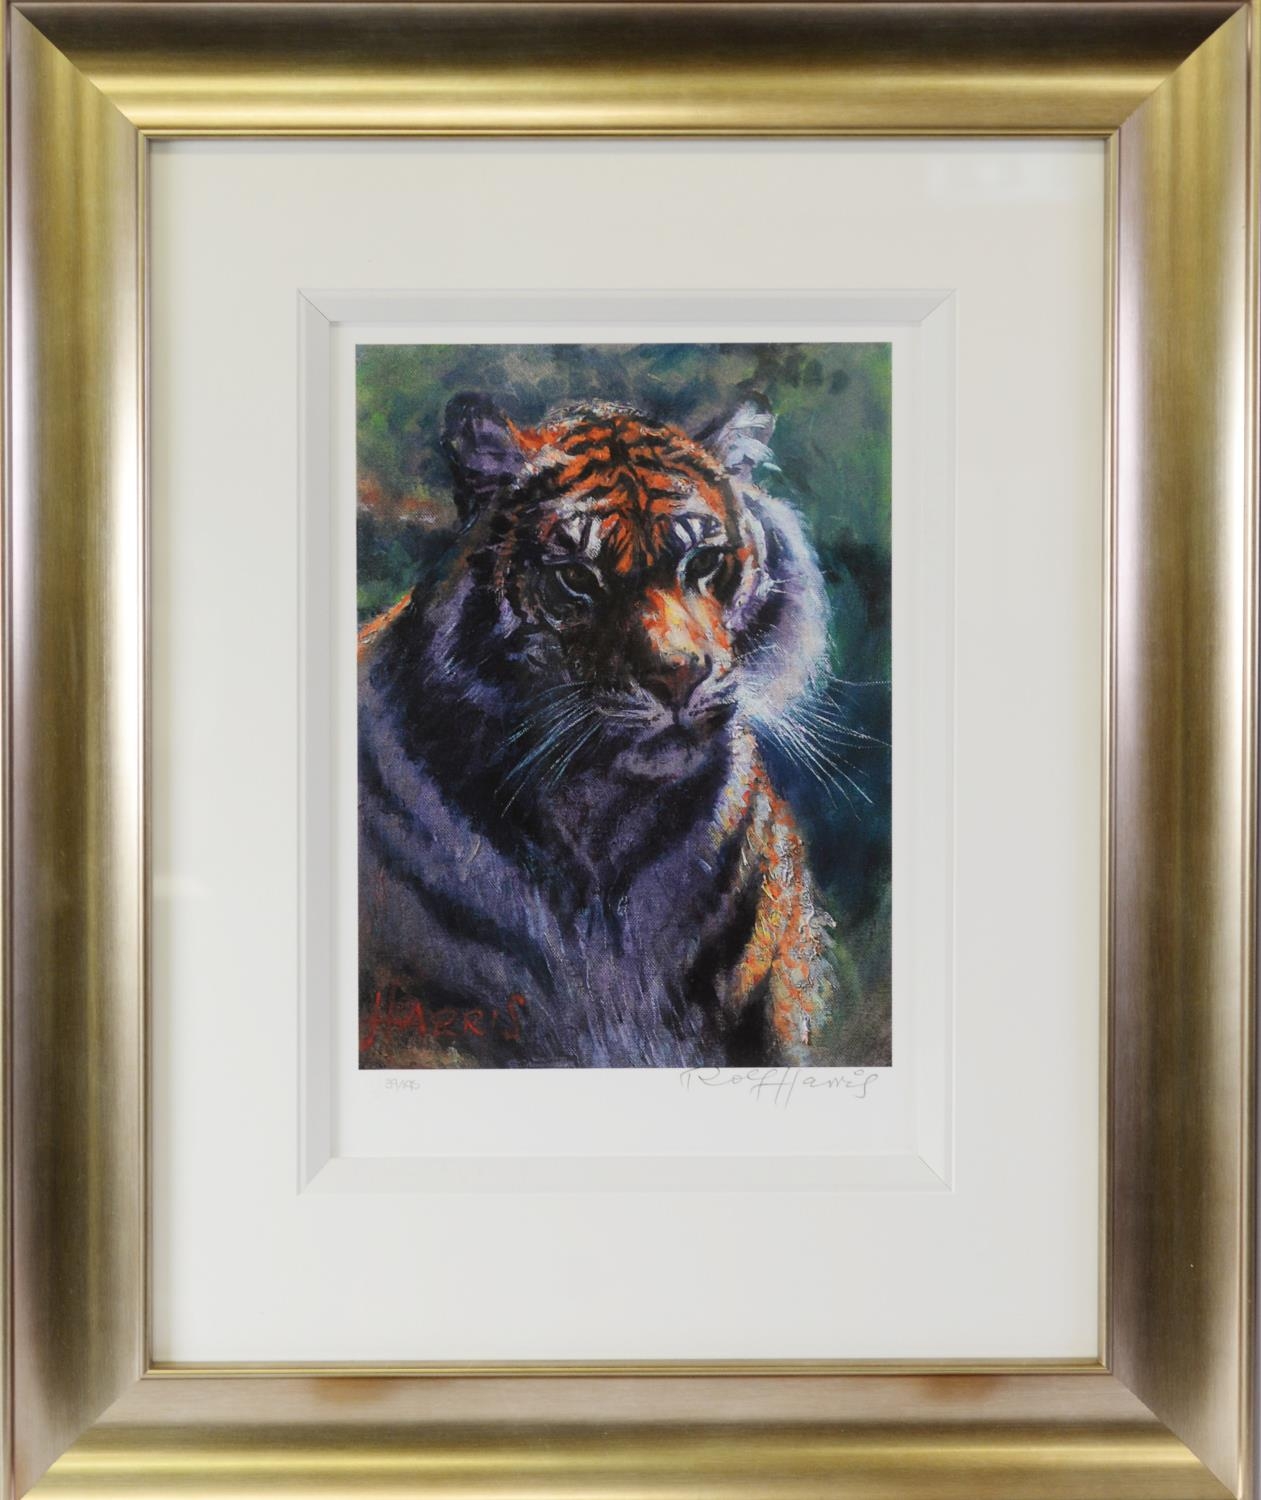 ROLF HARRIS (b.1930) ARTIST SIGNED LIMITED EDITION COLOUR PRINT ON PAPER ‘Tiger in the Sun’ (69/195) - Image 2 of 2